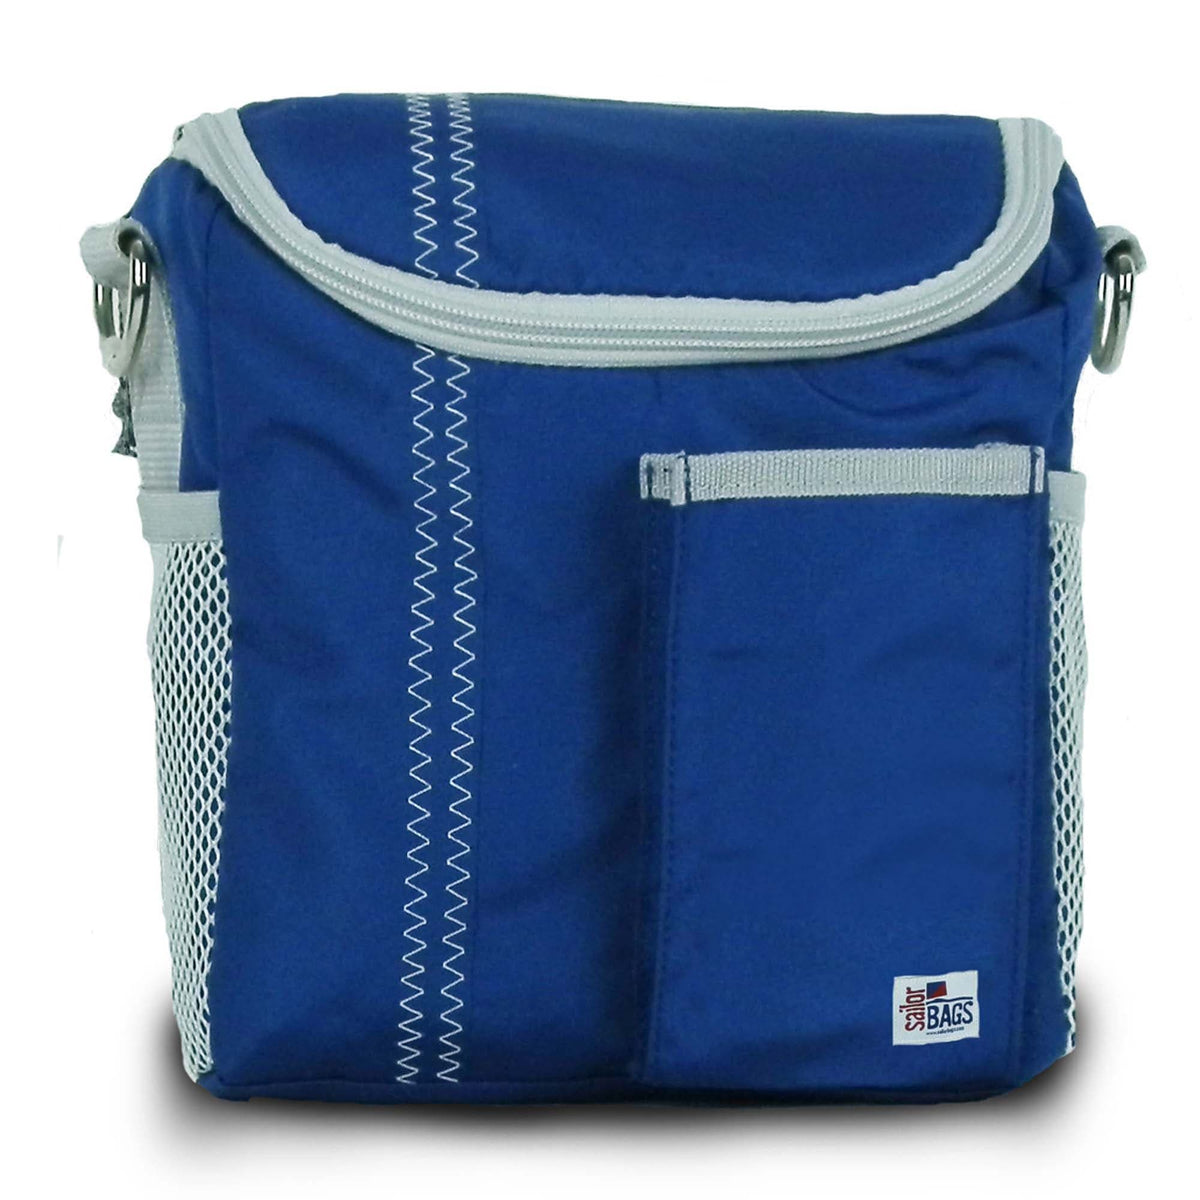 SailorBags Chesapeake Insulated Lunch Tote Bag